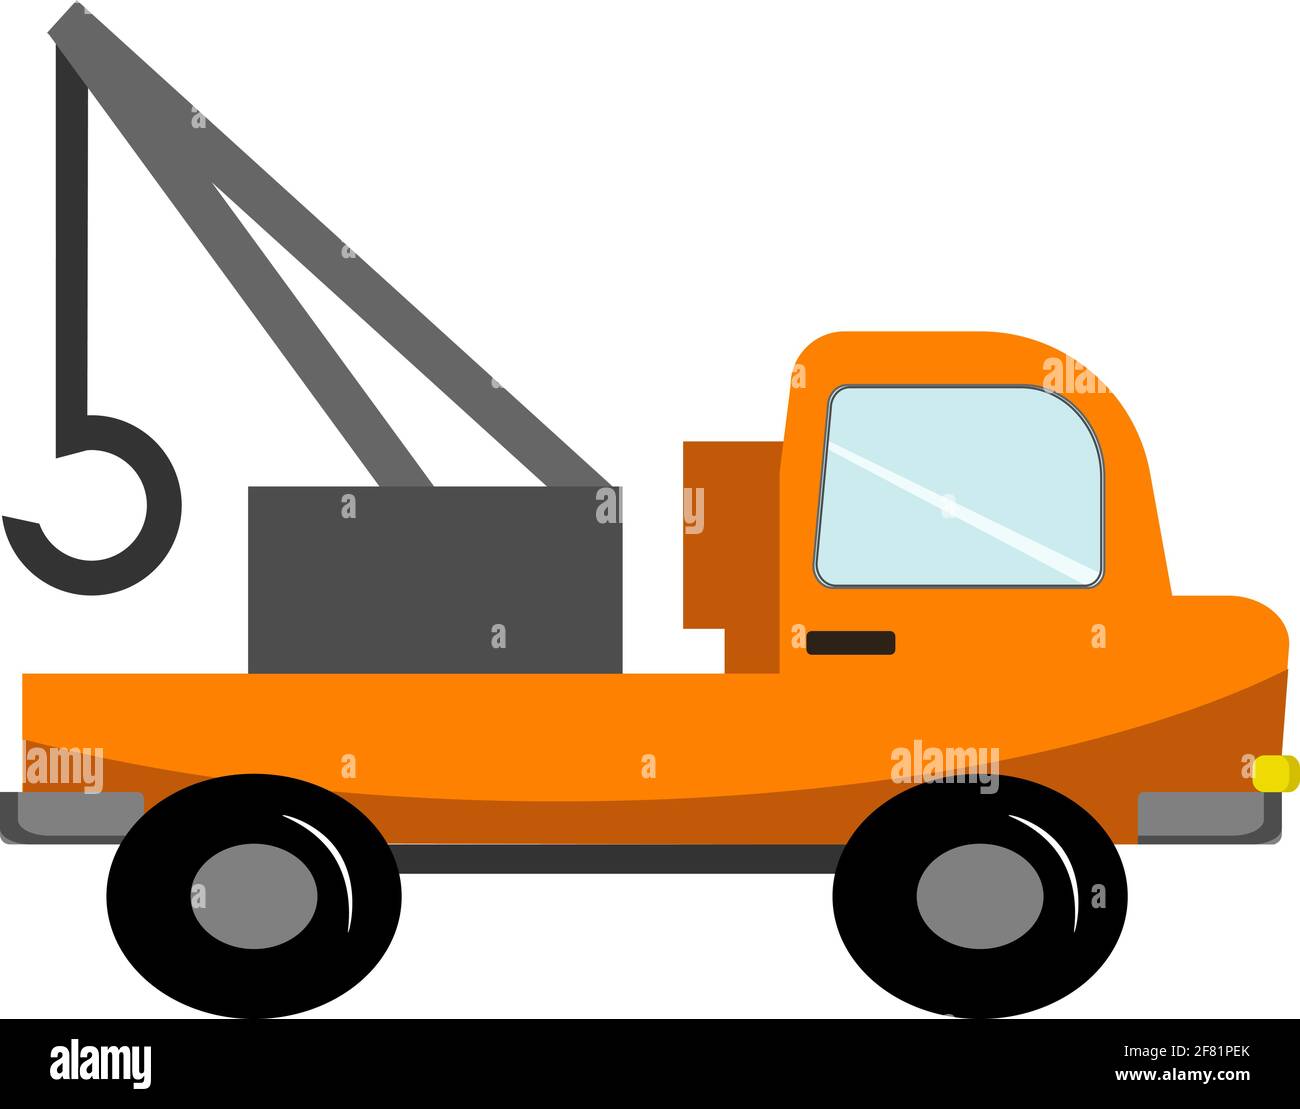 Orange car with a crane childrens toy illustration. Construction transport. Stock Vector